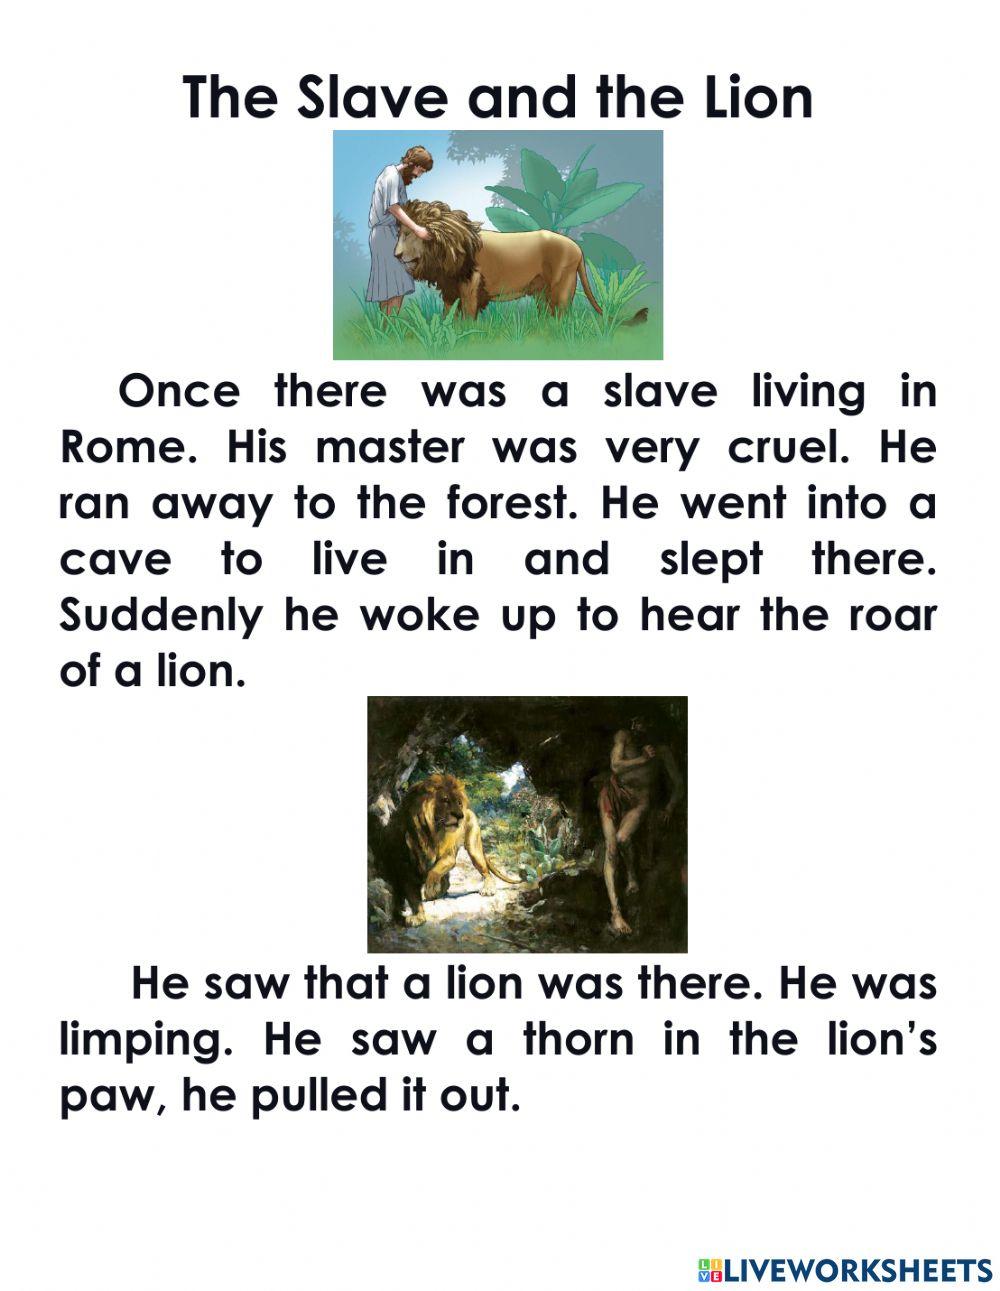 The slave and the lion